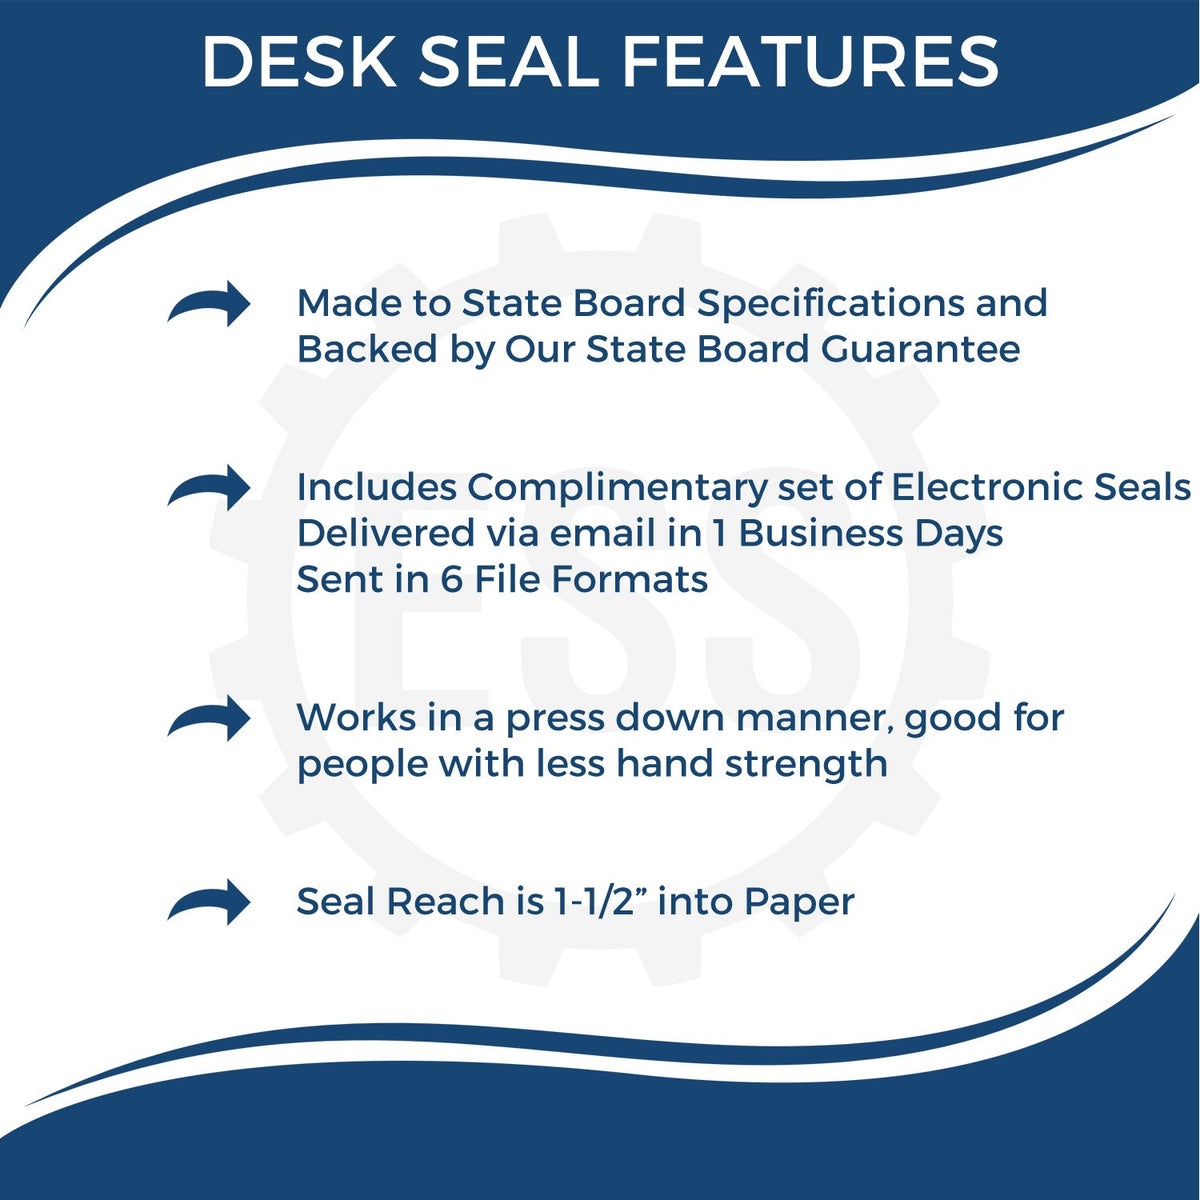 A picture of an infographic highlighting the selling points for the Ohio Geologist Desk Seal